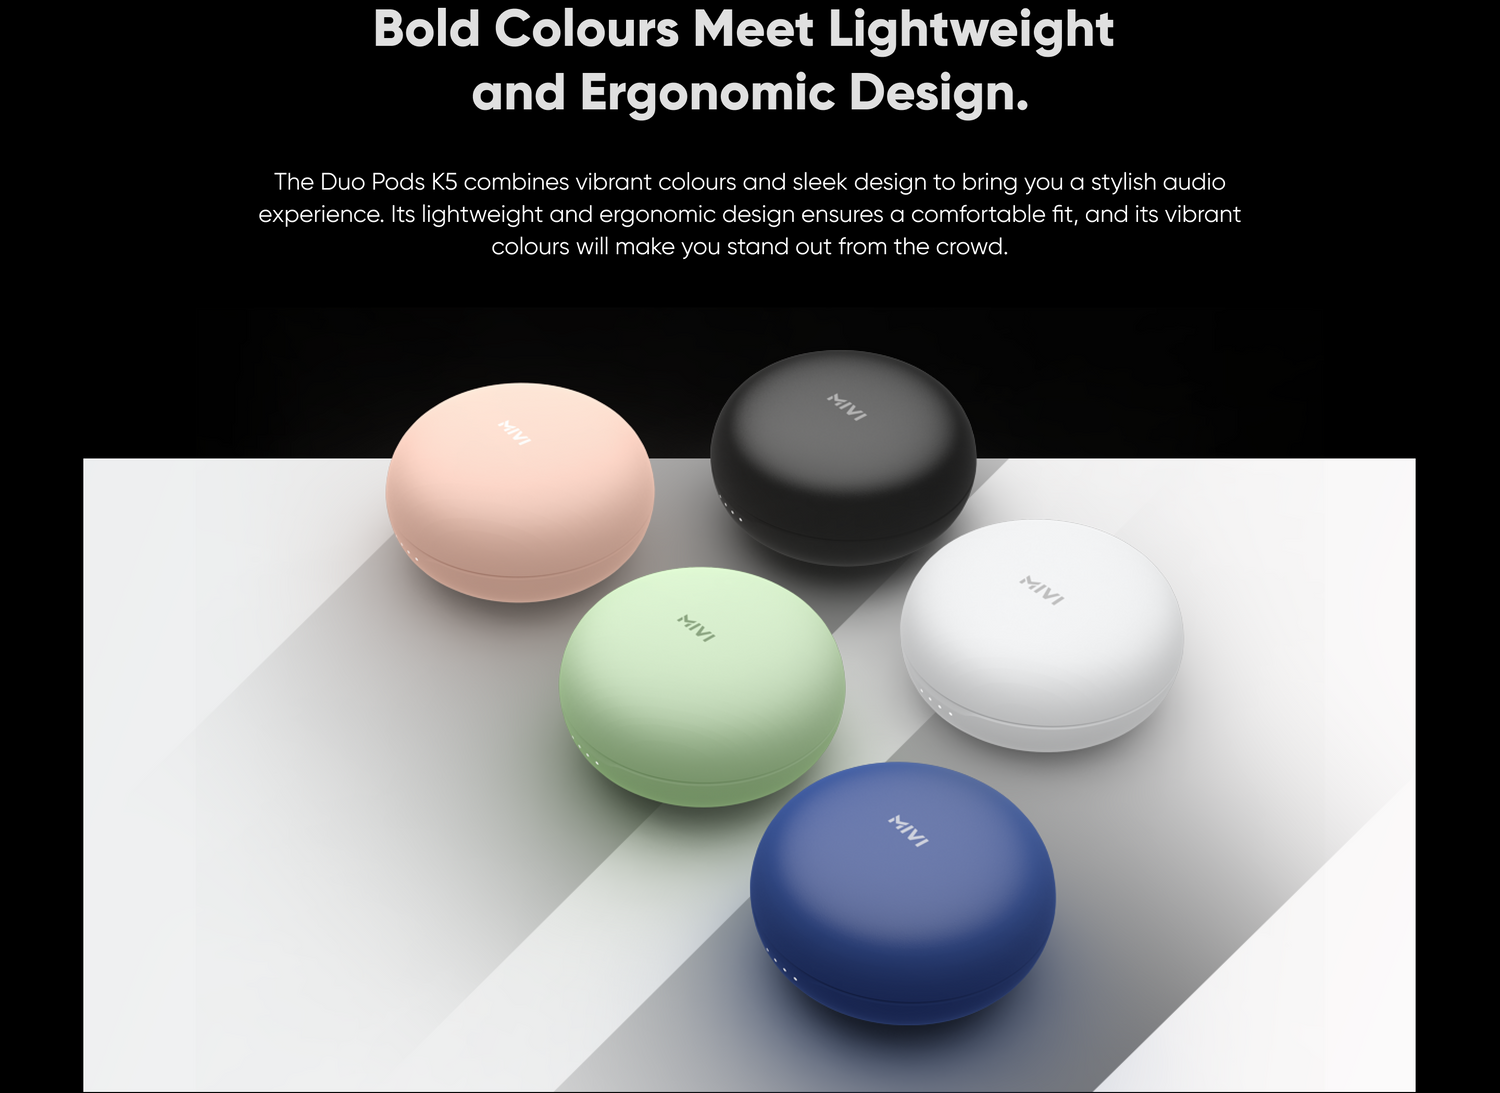 Bold Colours Meet Lightweight and Ergonomic Design. The Duo Pods K5 combines vibrant colours and sleek design to bring you a stylish audio experience. Its lightweight and ergonomic design ensures a comfortable fit, and its vibrant colours will make you stand out from the crowd.